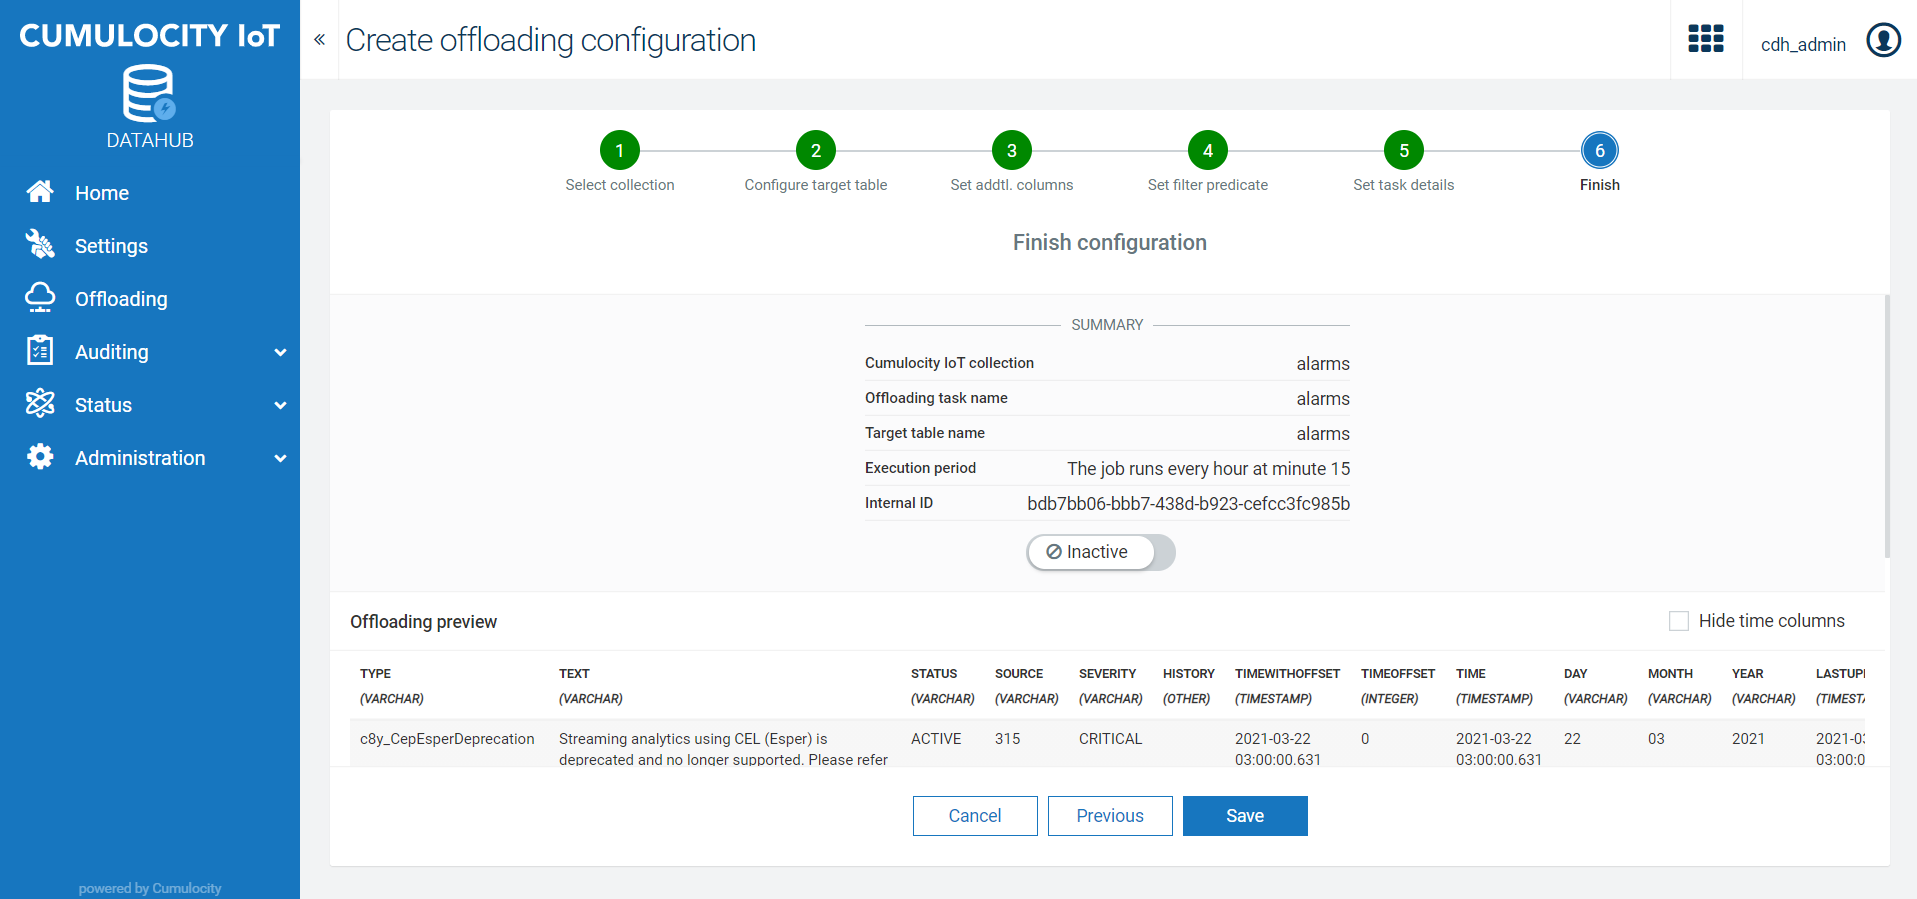 Validate an offloading configuration